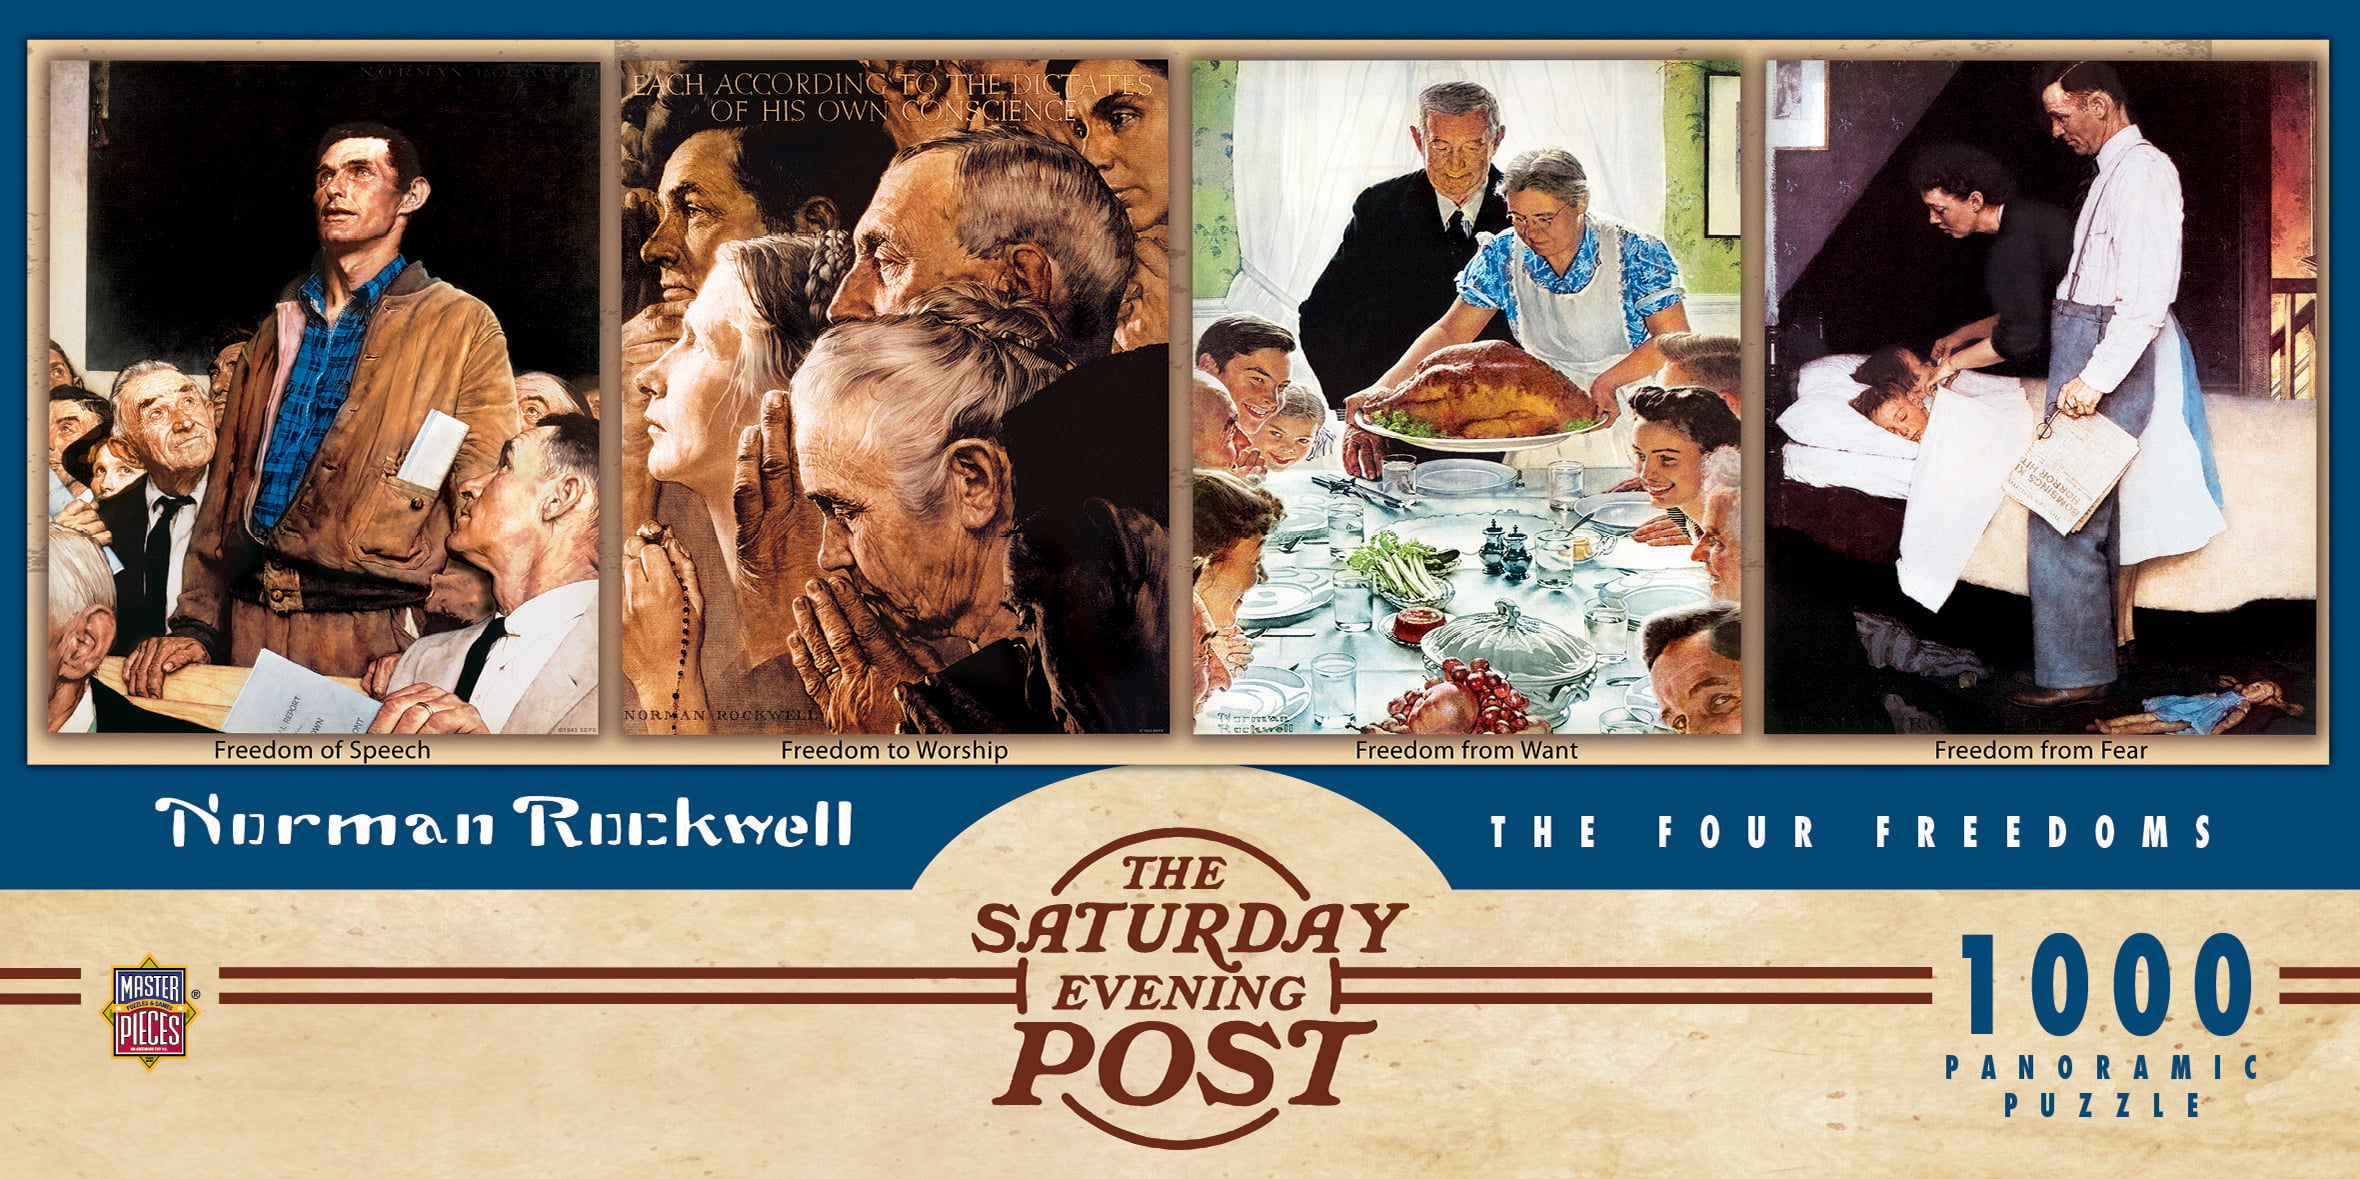 MasterPieces Saturday Evening Post Farmland Collage Jigsaw Puzzle by Norman Rockwell 1000-Piece